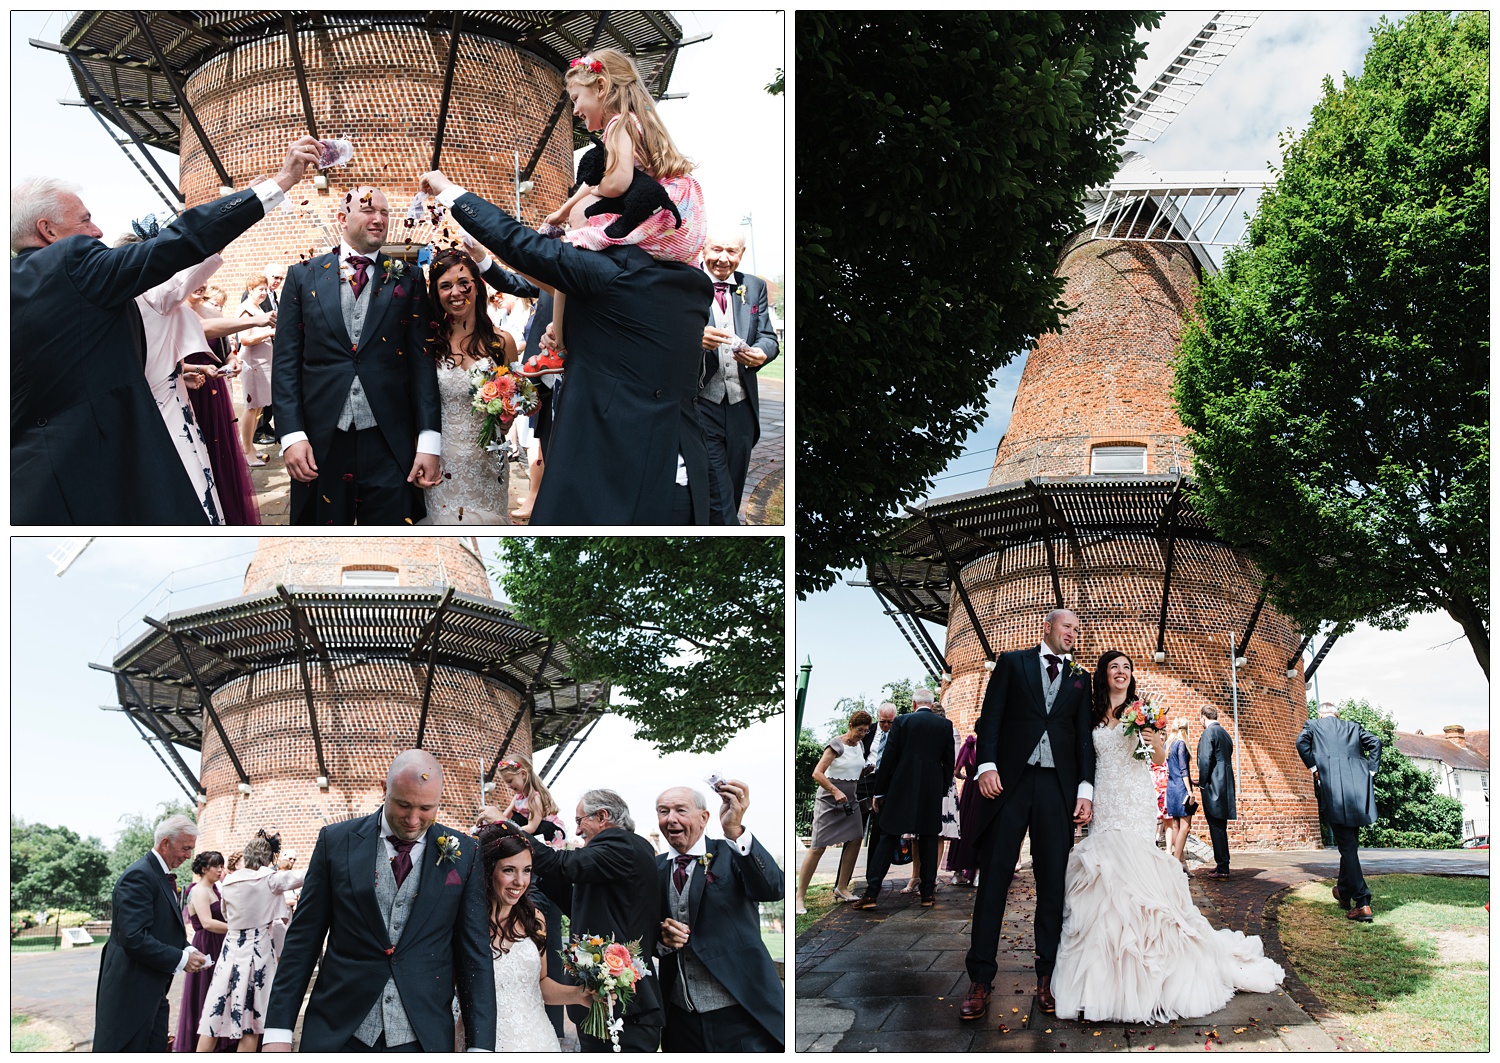 People throwing confetti at a couple after getting married in the Rayleigh Windmill.